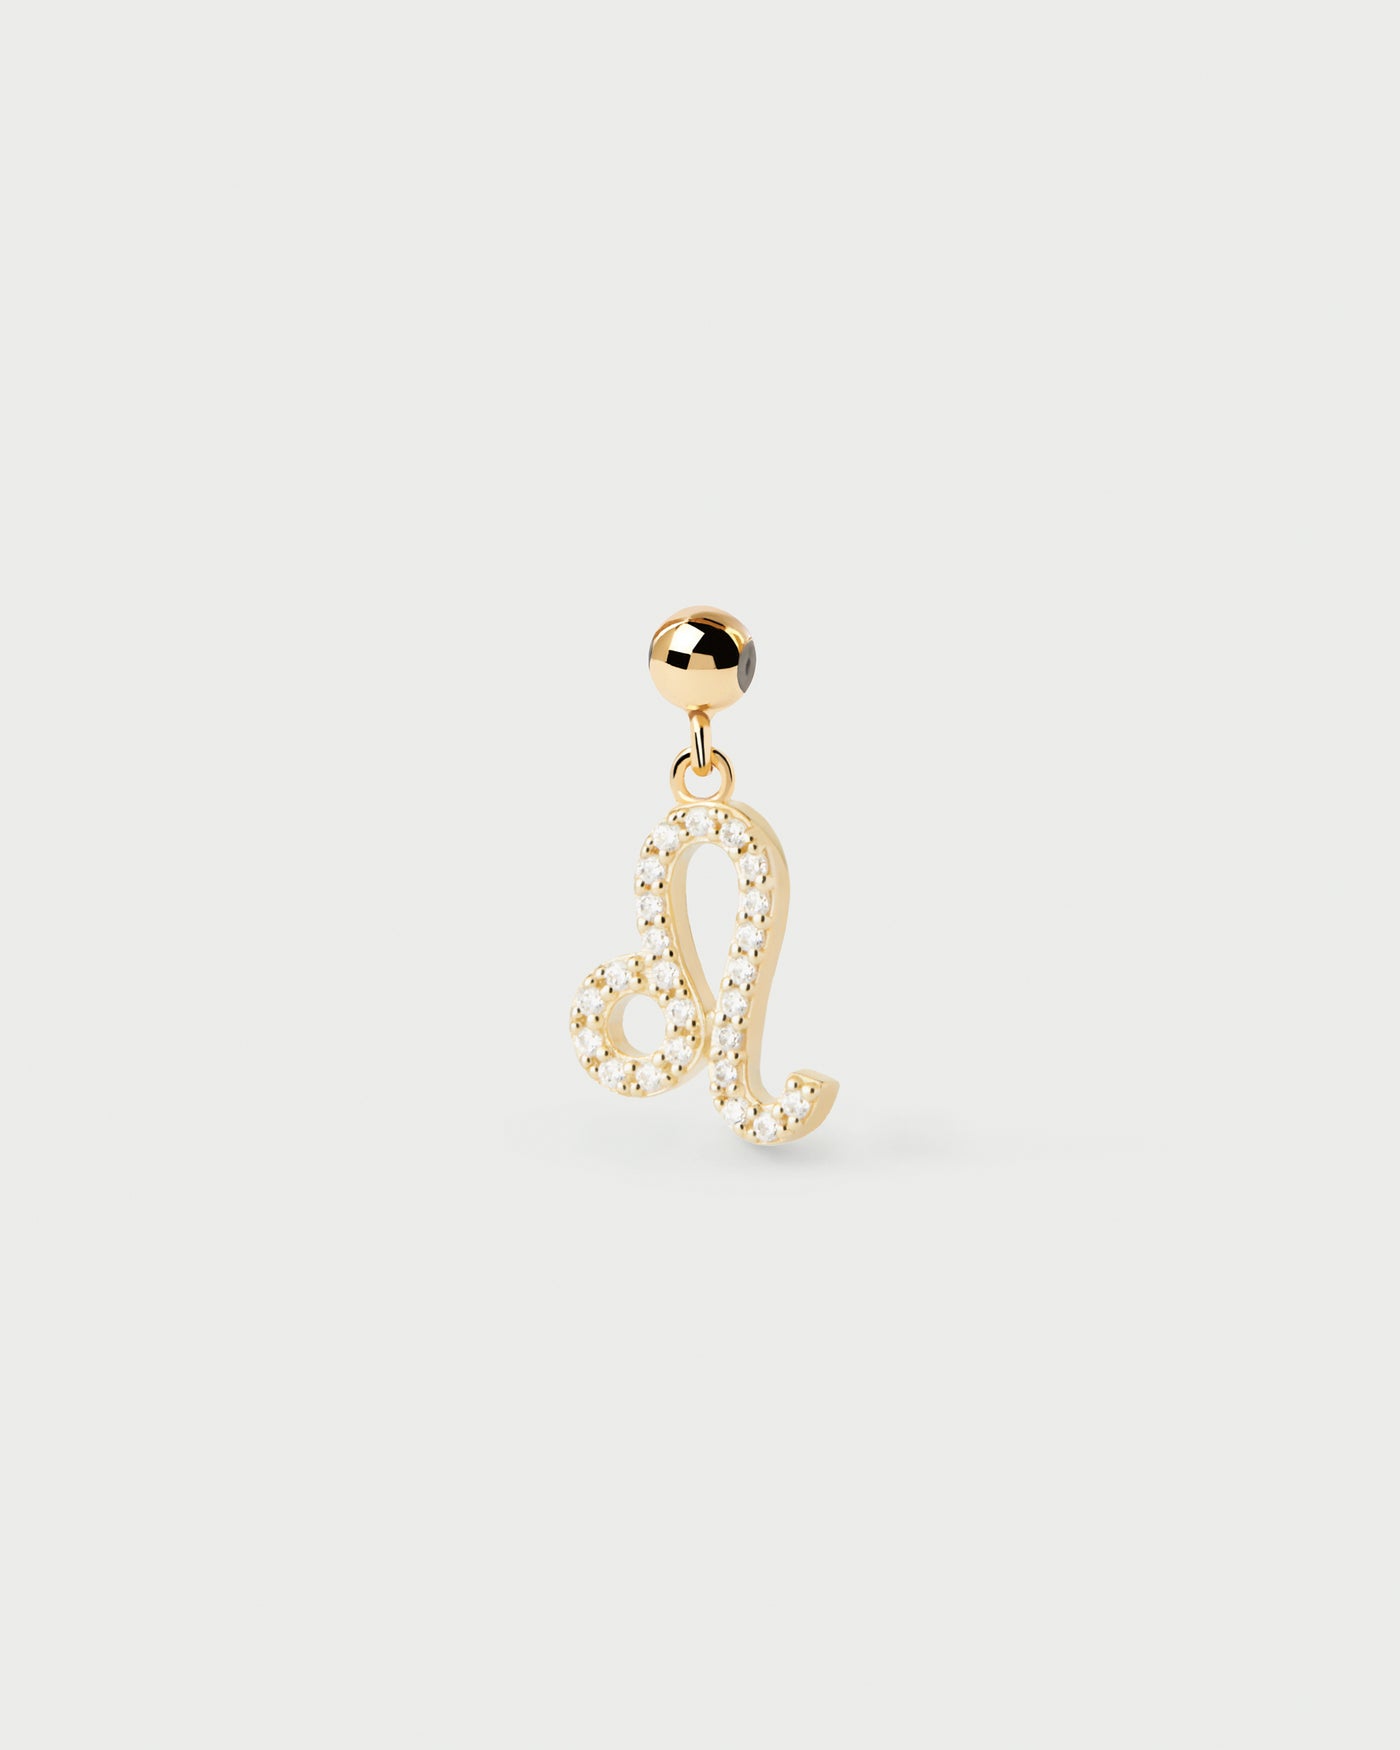 Leo Zodiac Charm Leo astrological sign charm adorned with white zirconia to customize necklace or bracelet . Get the latest arrival from PDPAOLA. Place your order safely and get this Best Seller. Free Shipping.